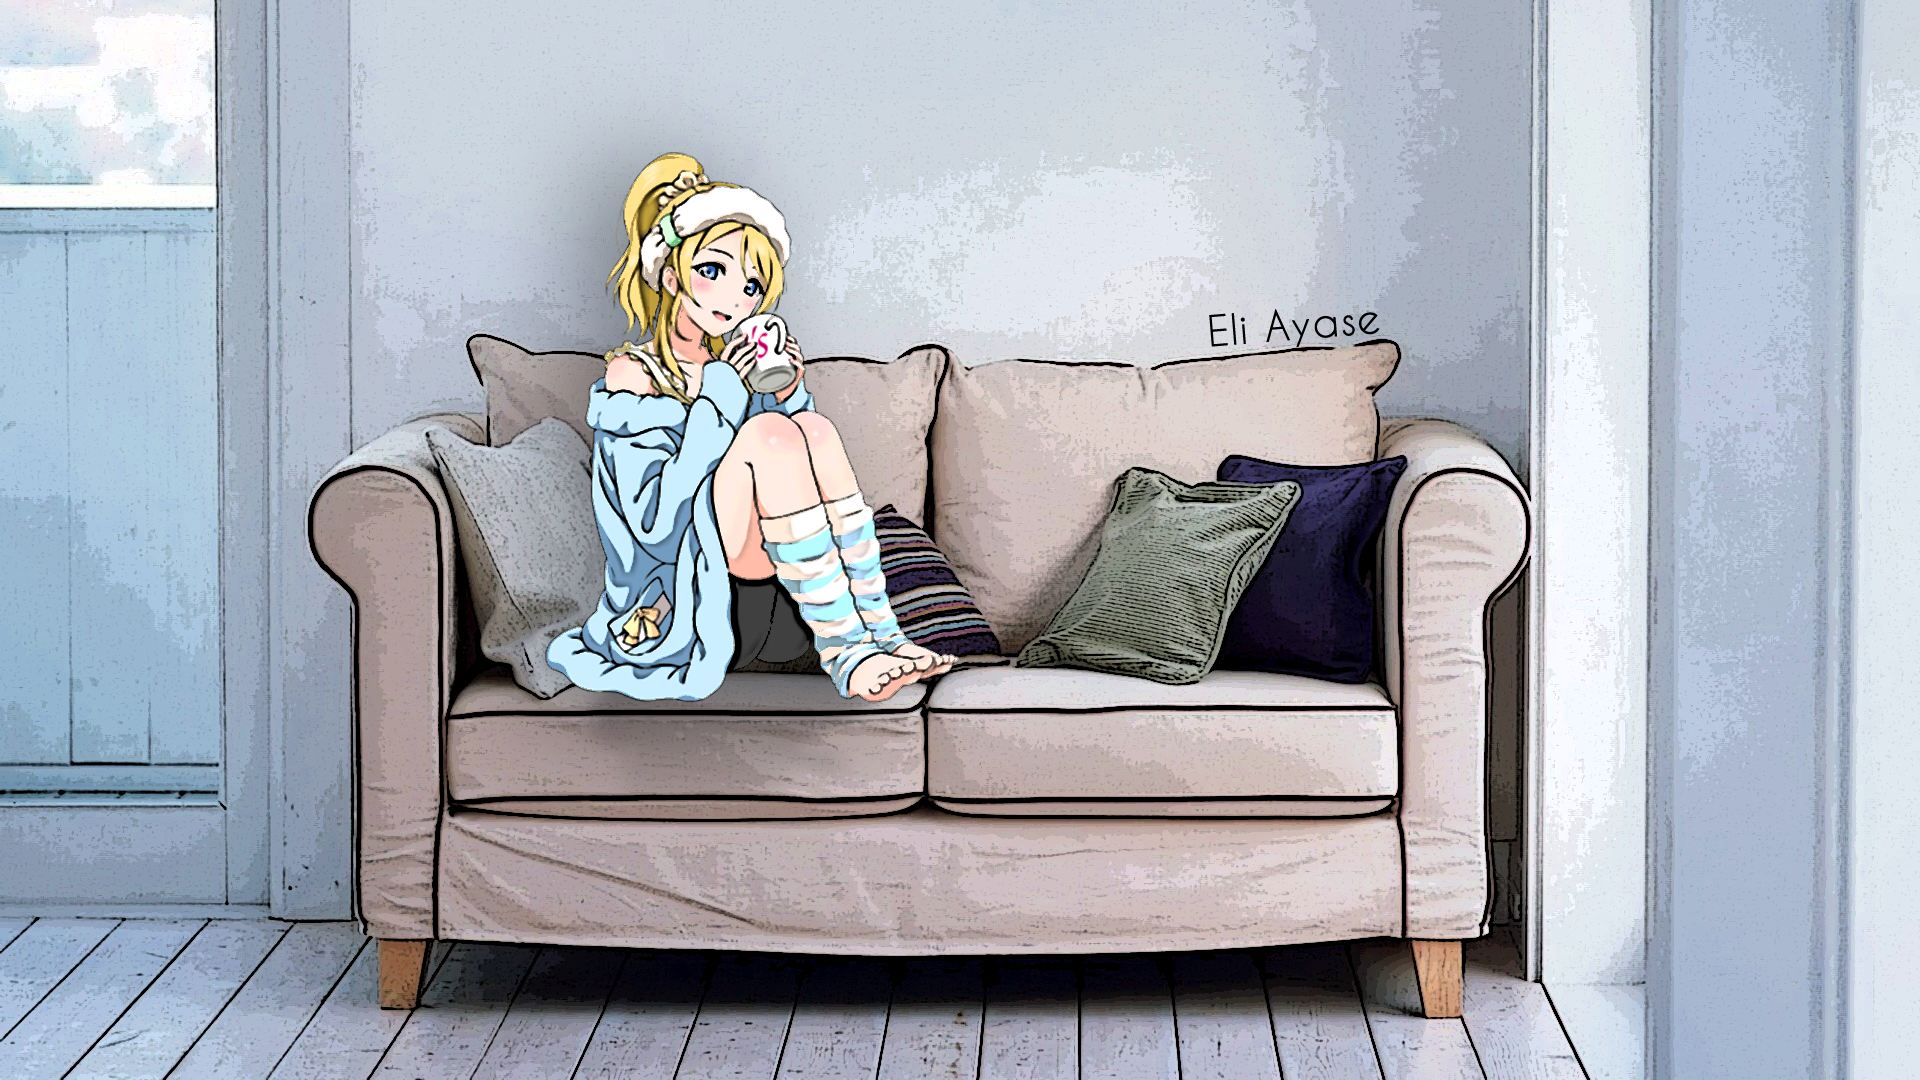 Anime 1920x1080 couch Ayase Eli anime girls barefoot cup anime blonde women indoors indoors